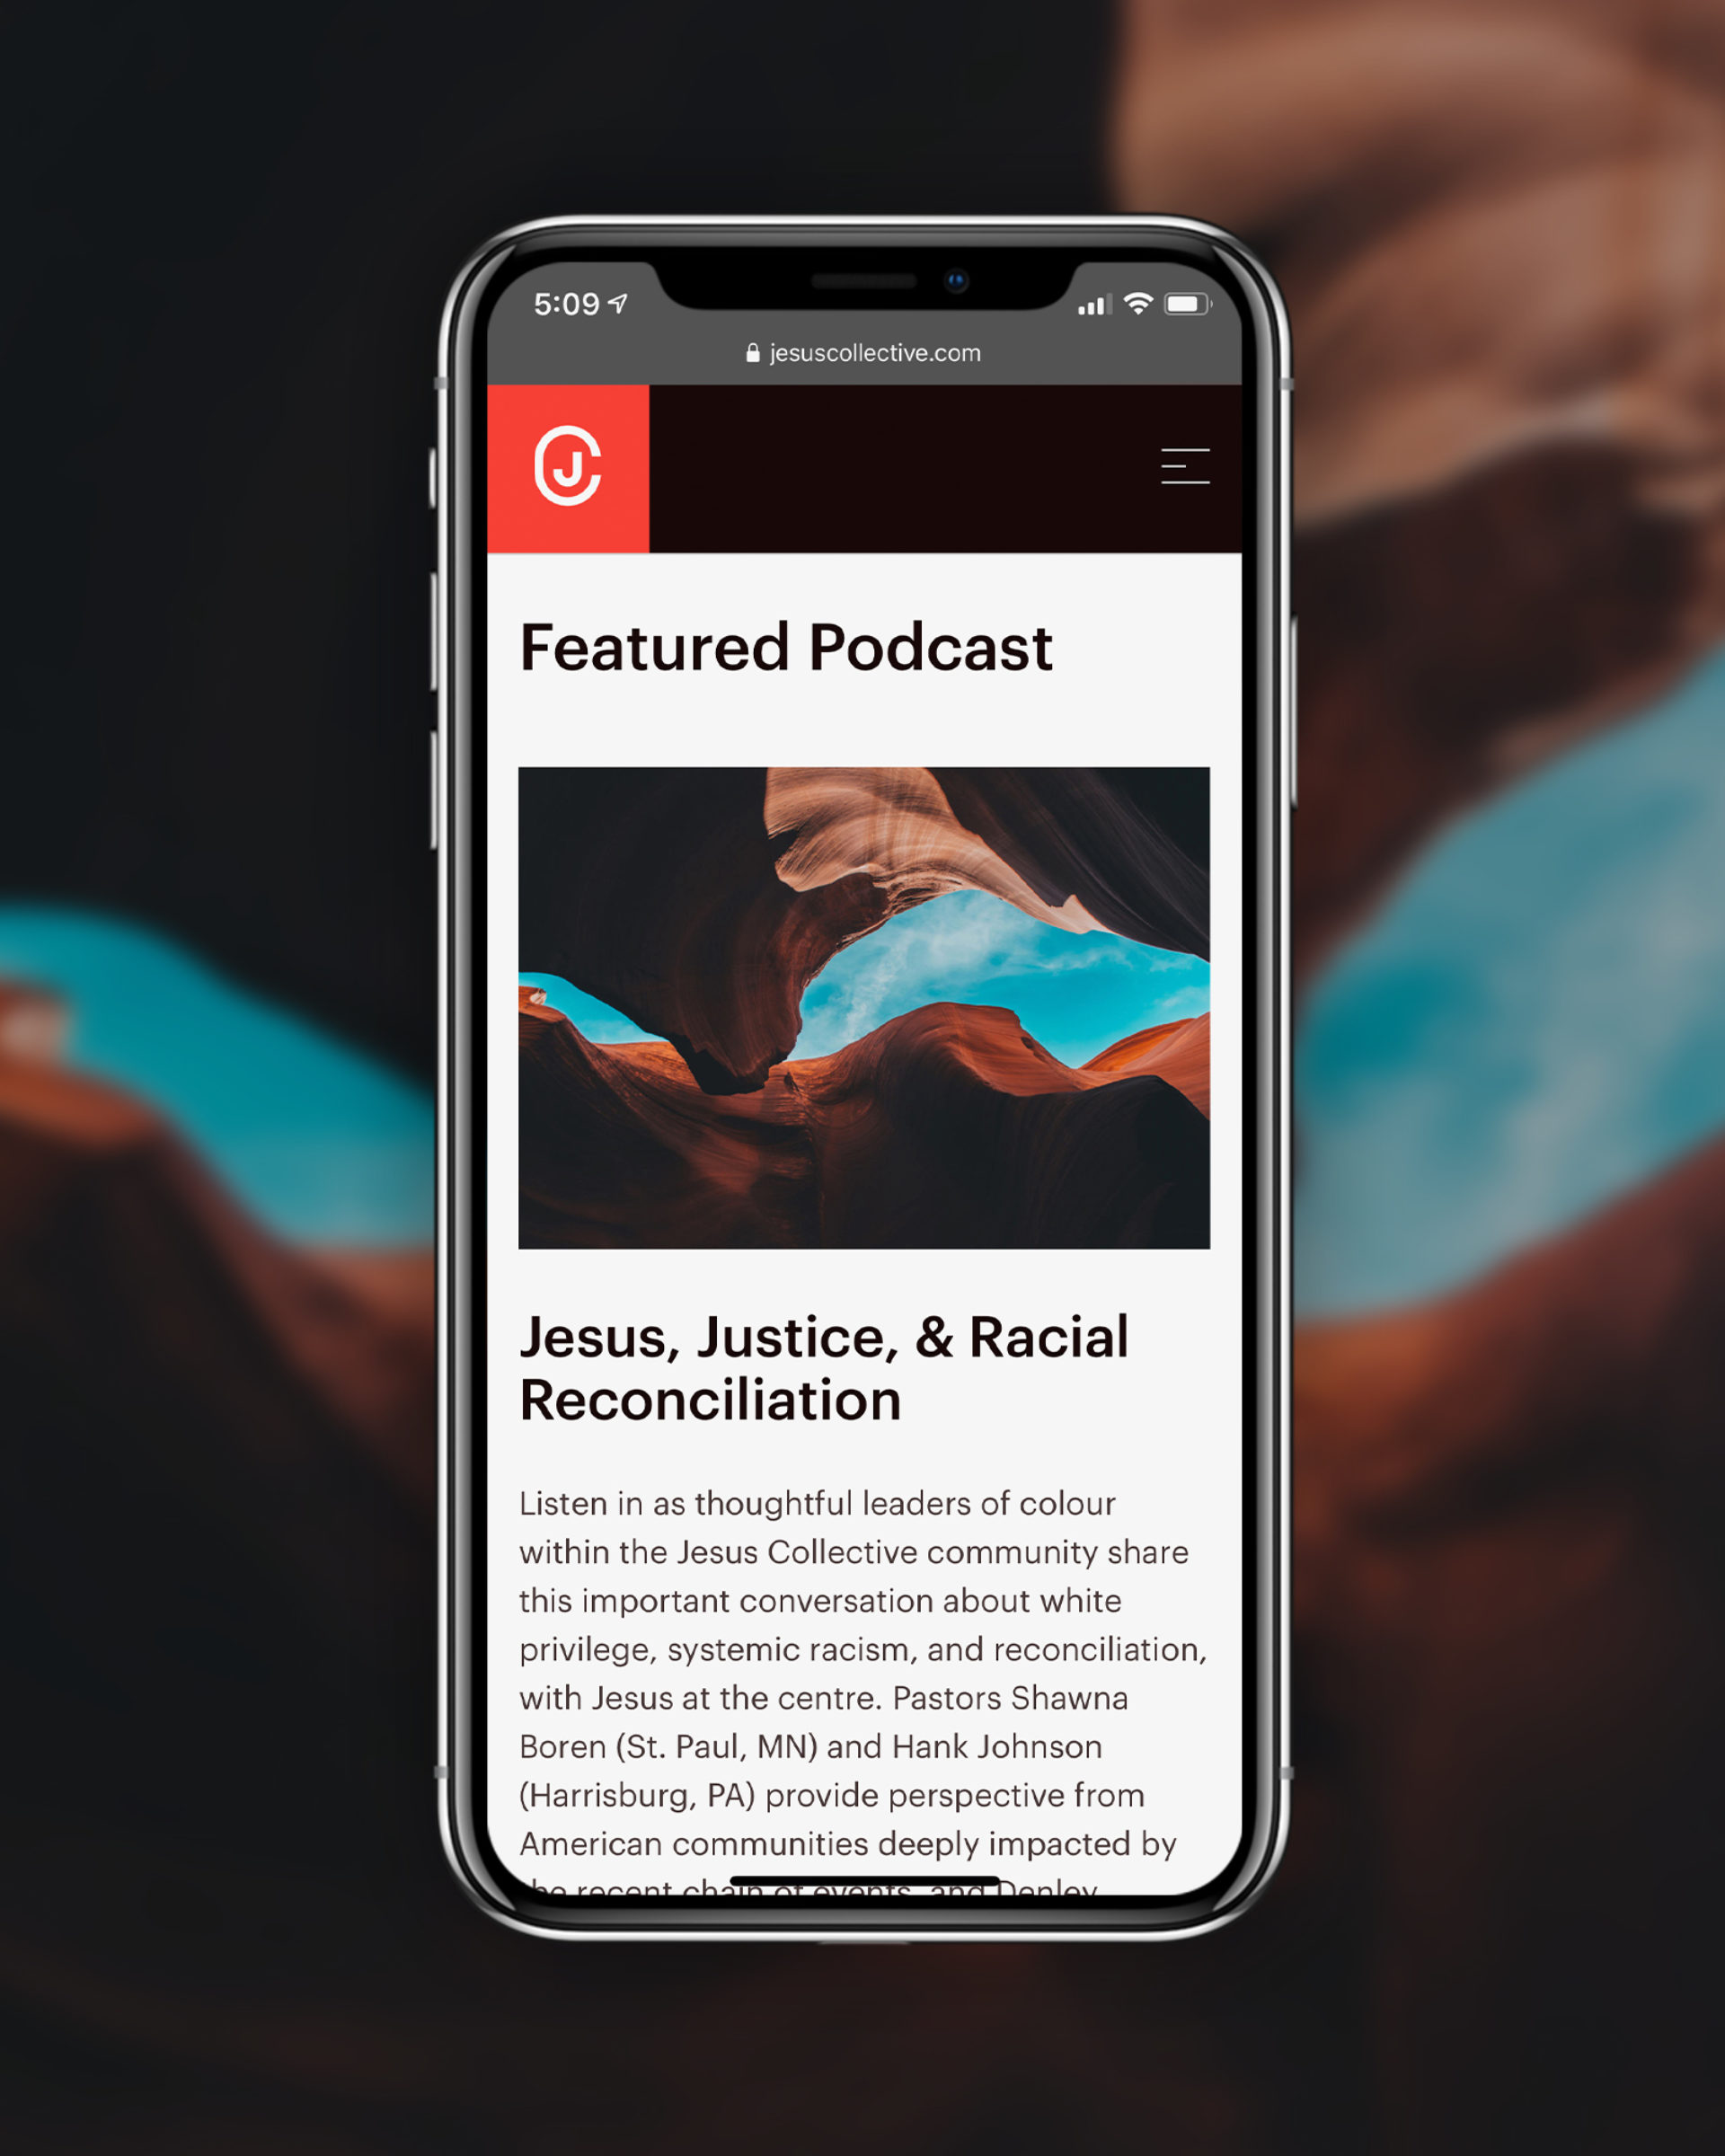 A featured podcast on the Jesus Collective website